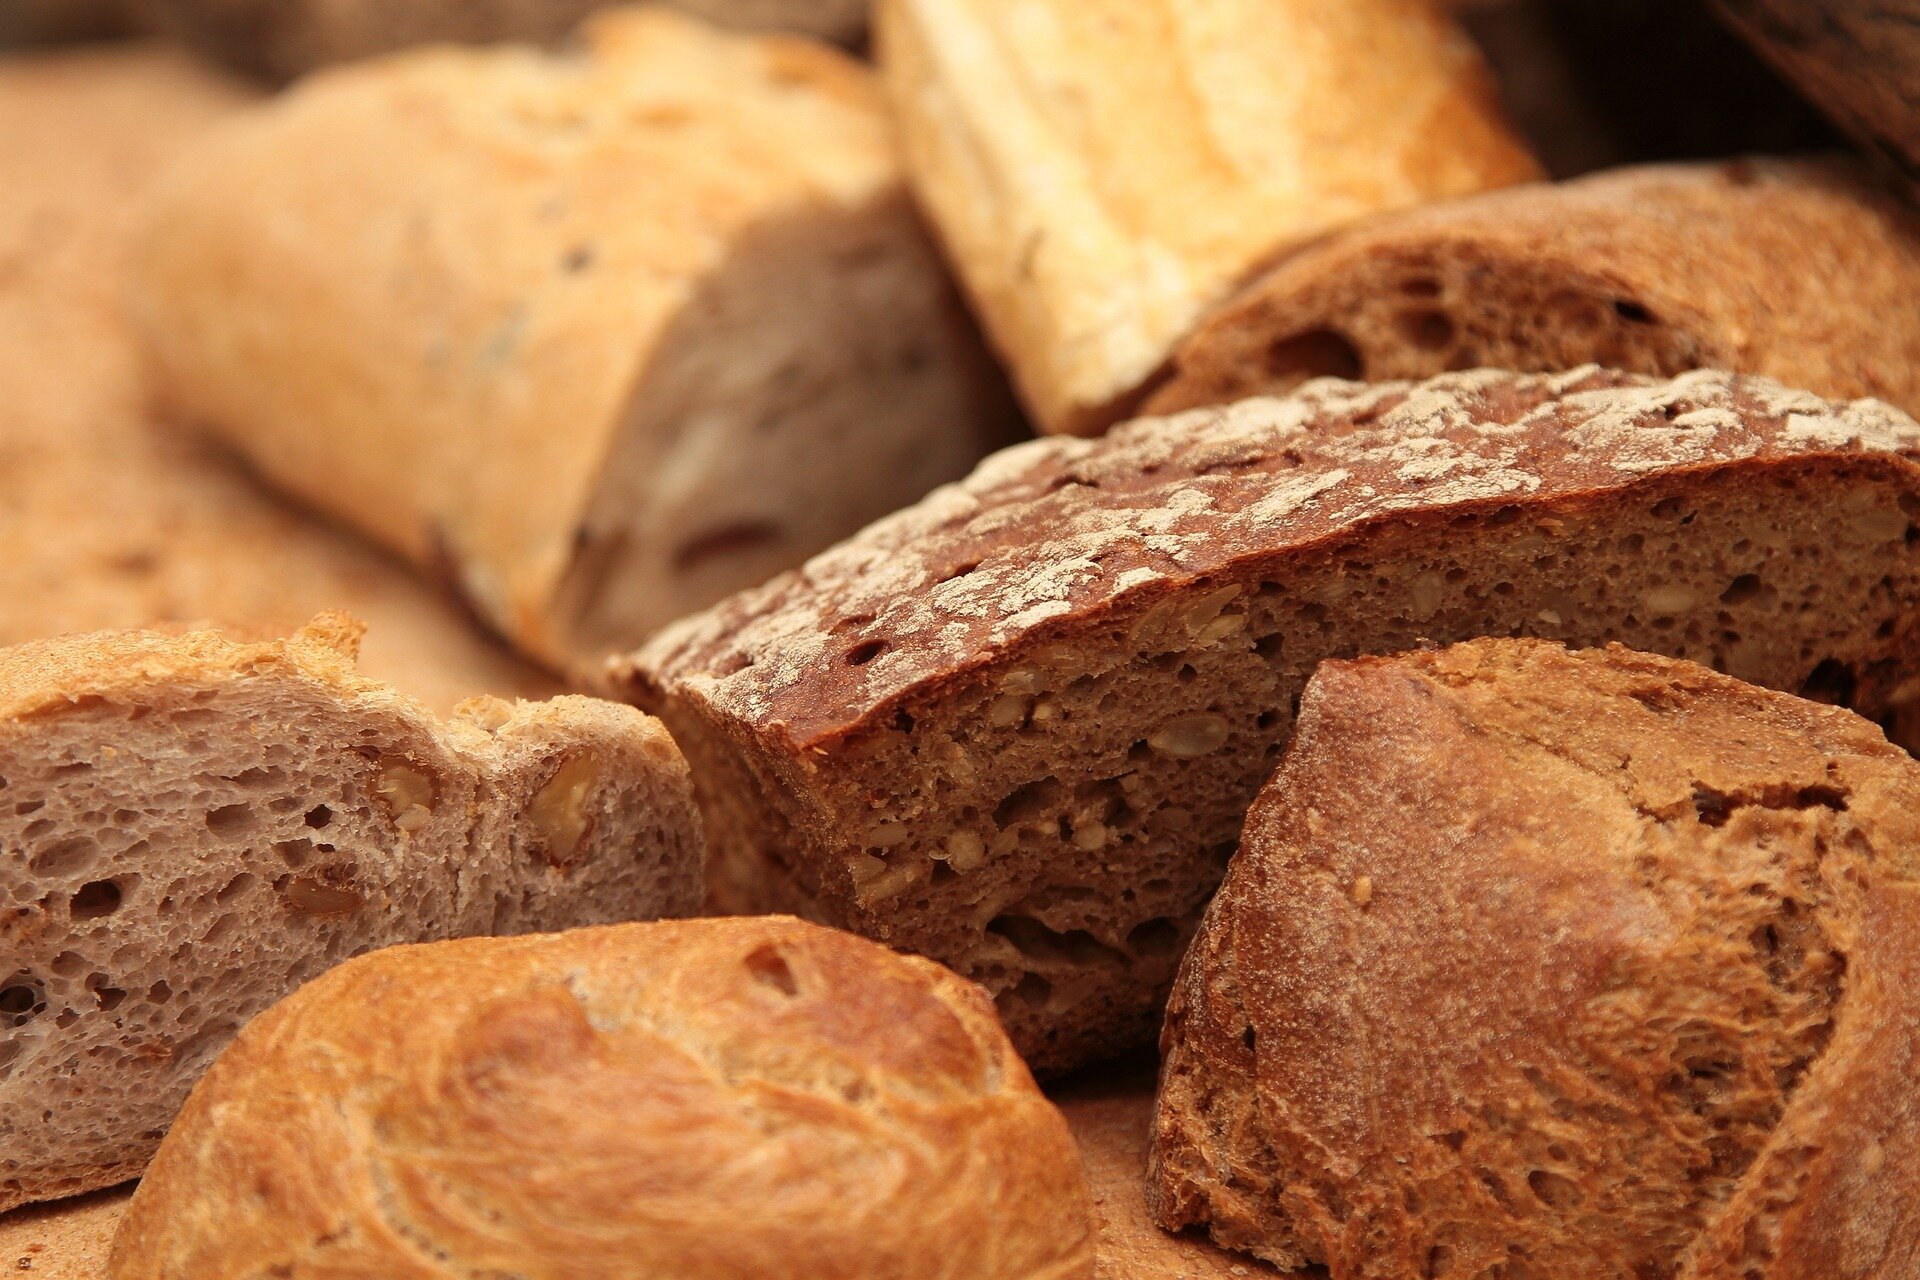 Taking a bite out of food waste: Scientists repurpose waste bread to feed microbes